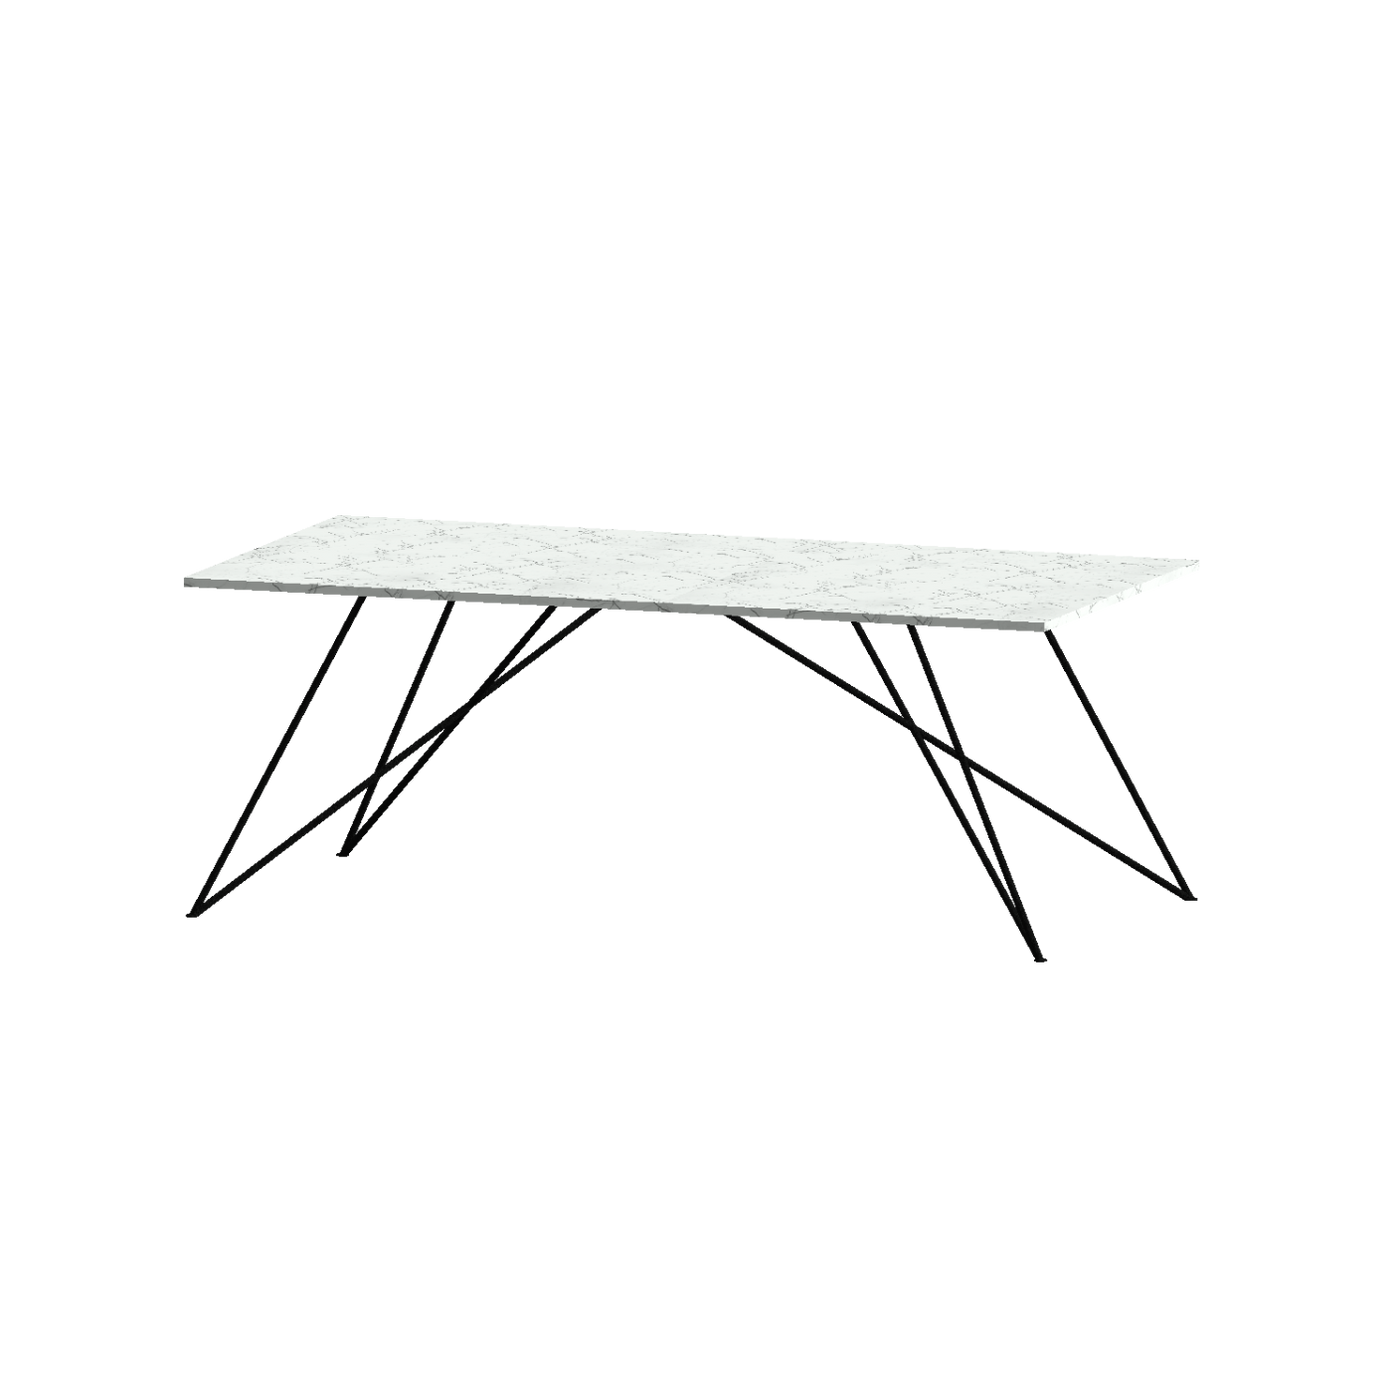 DINING TABLE, RECTANGLE, LARGE - Customer's Product with price 4700.00 ID KgV-BSFzPWTIJk3uB9y9QKLs